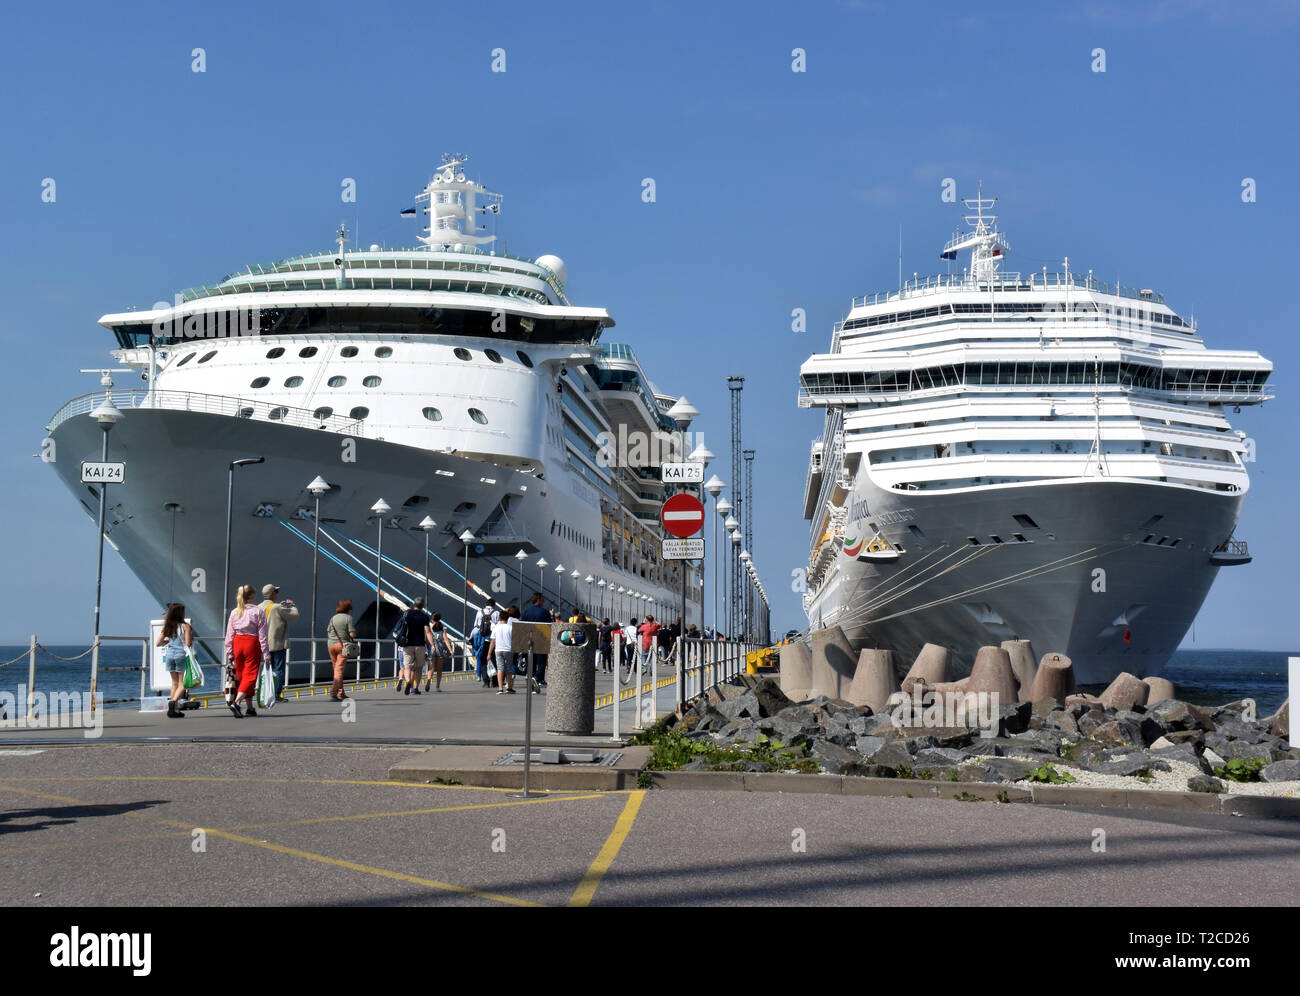 Tallinn, Estonia. 12th July, 2018. Two cruise ships (MSC Ochestra (l) and  Mein Schiff 1 (r)) are located at the cruise terminal of the port city.  Tallinn (former German name: Reval), the